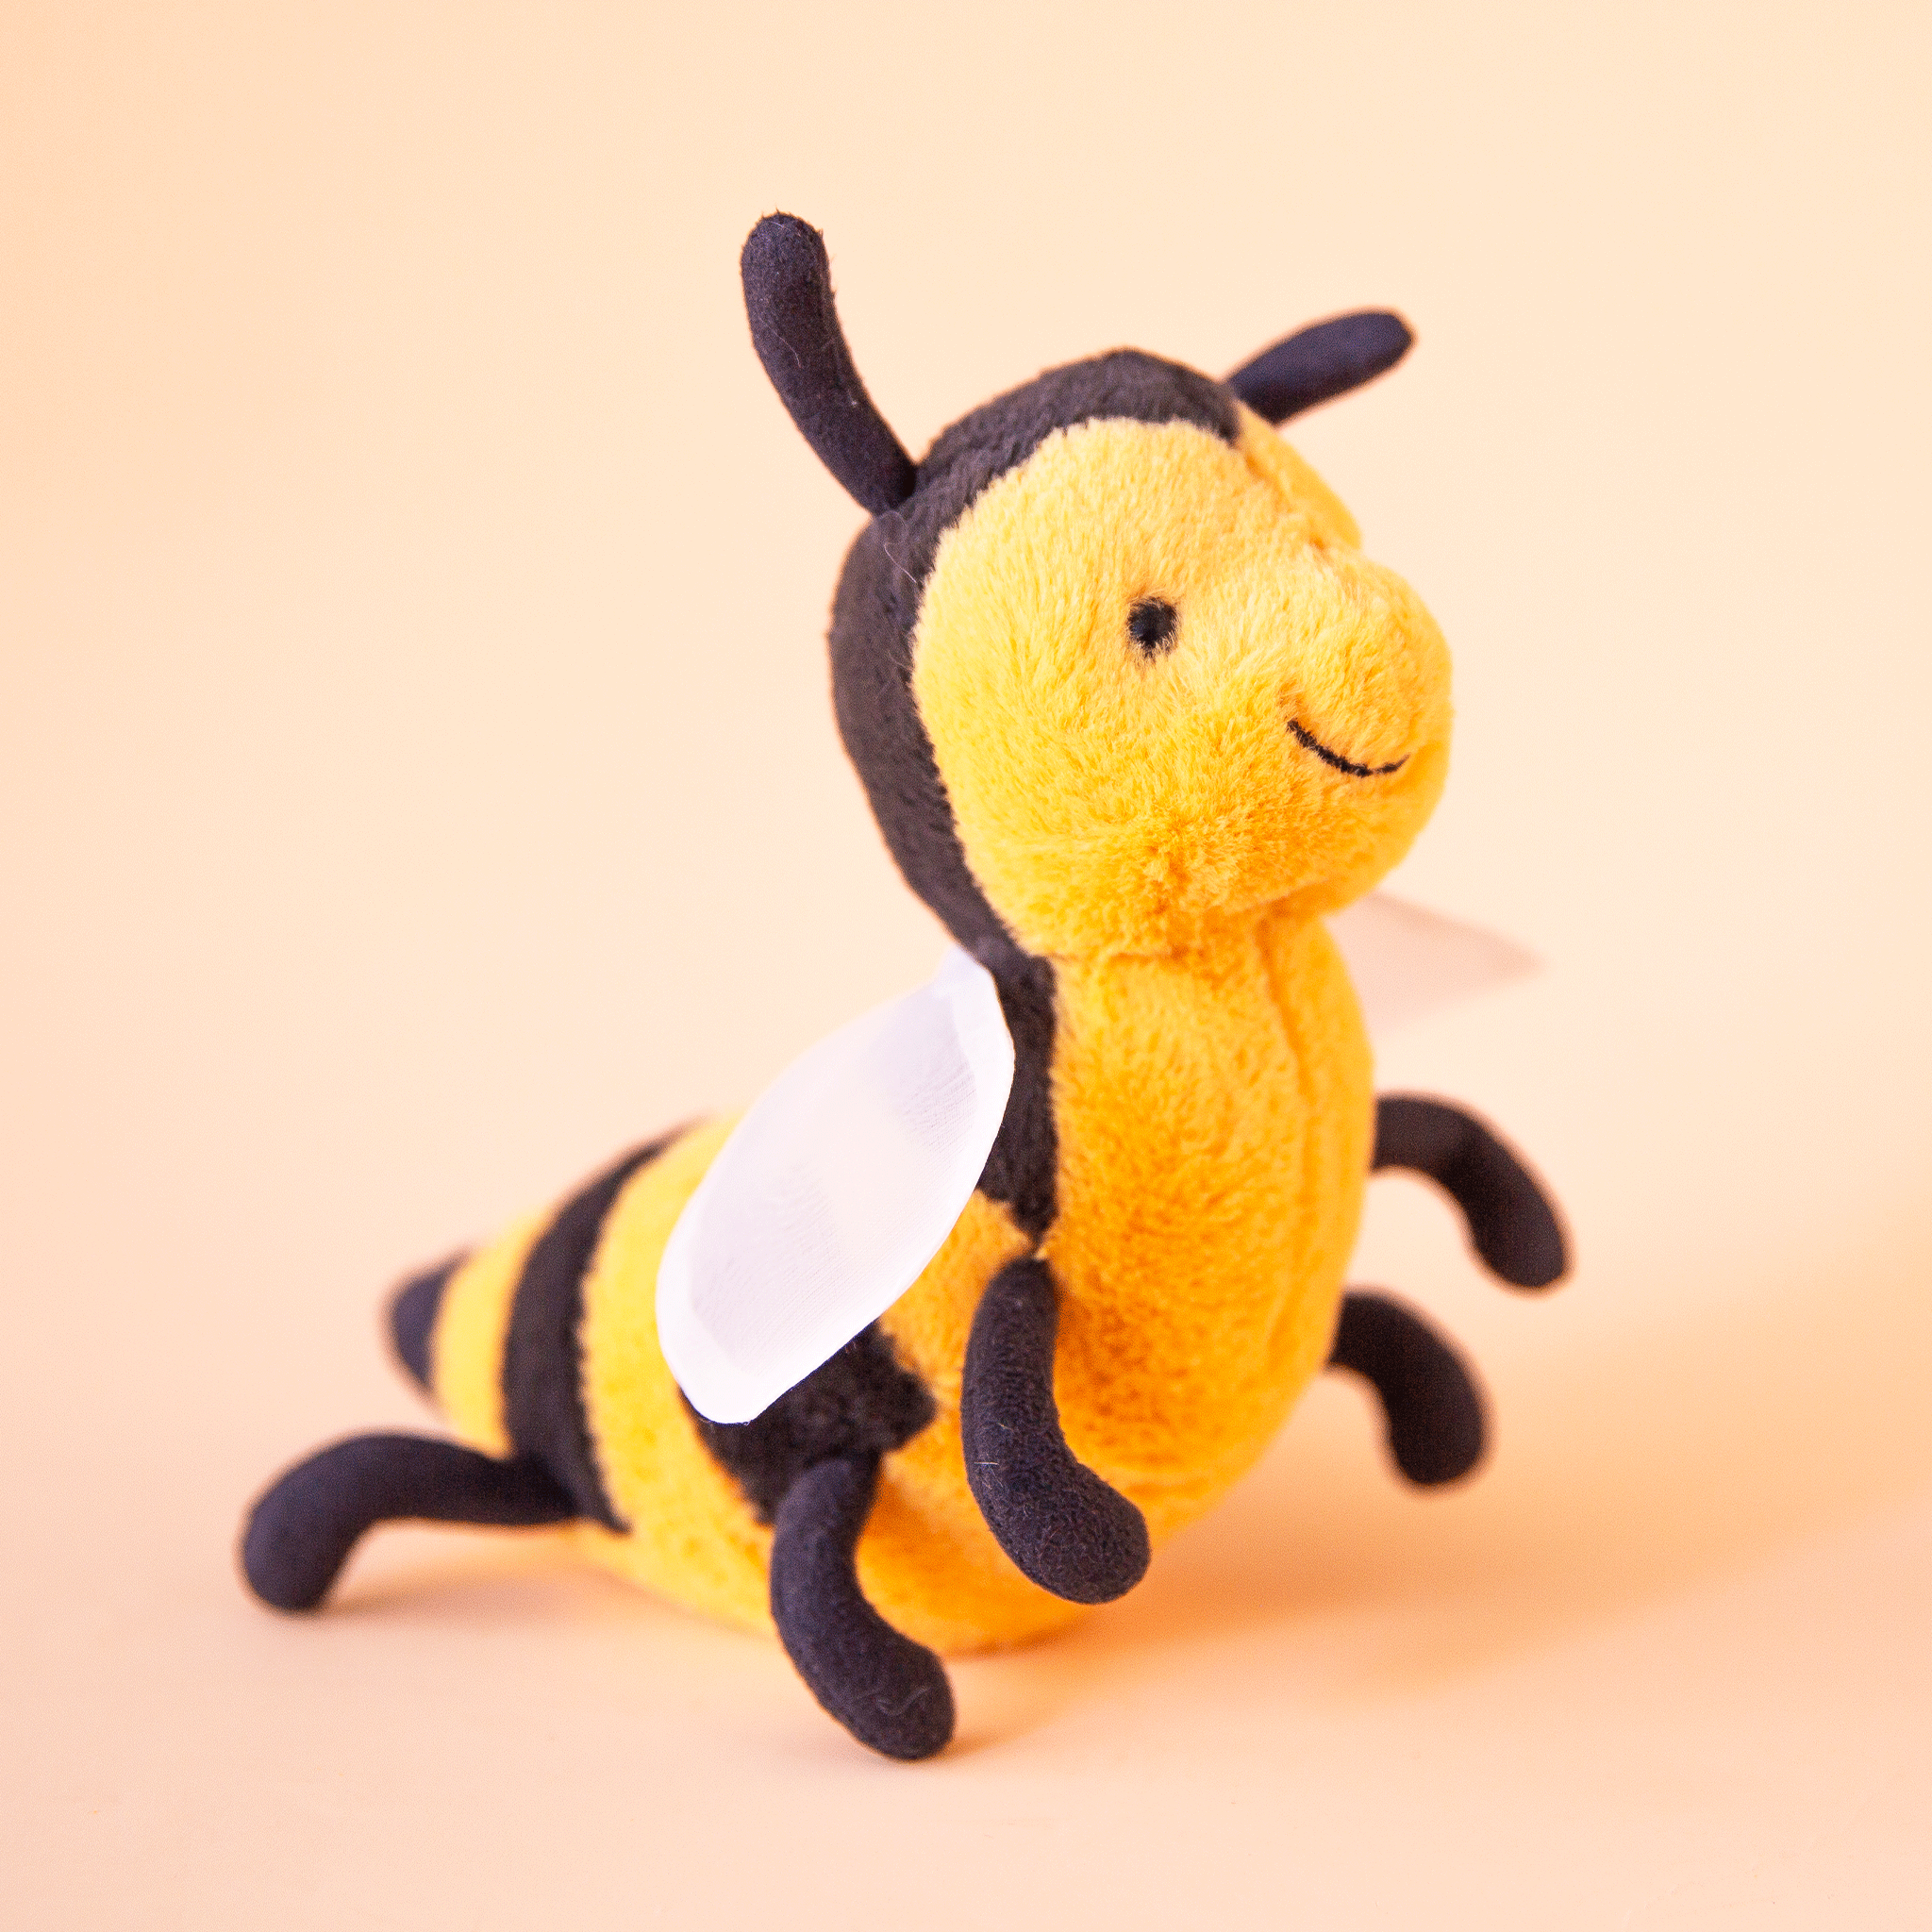 On a peachy background is a yellow and black bee stuffed animal with a smiling face, a fuzzy body and round wings.